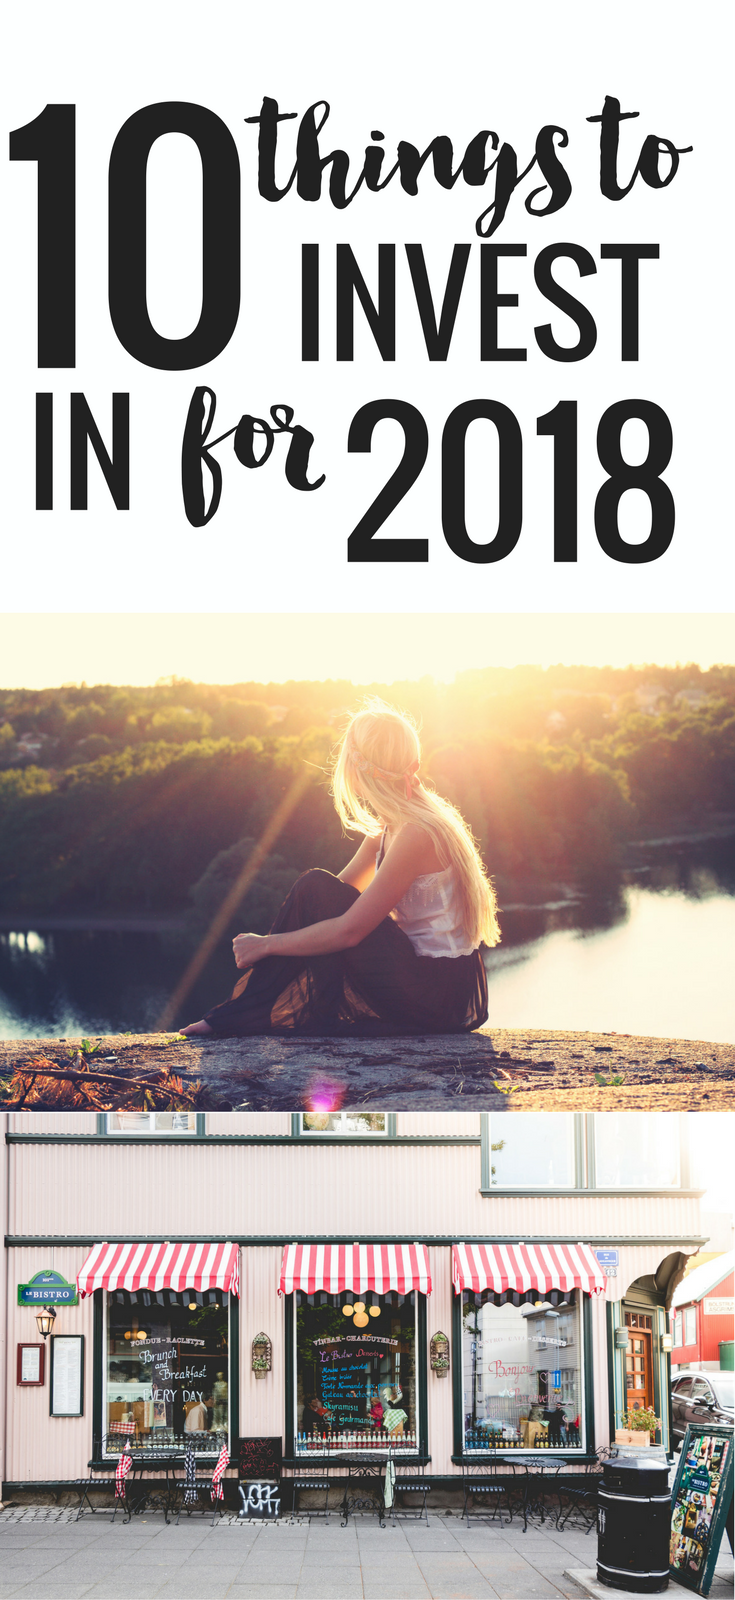 10 Things to Buy in 2018 to Make your Life Easier